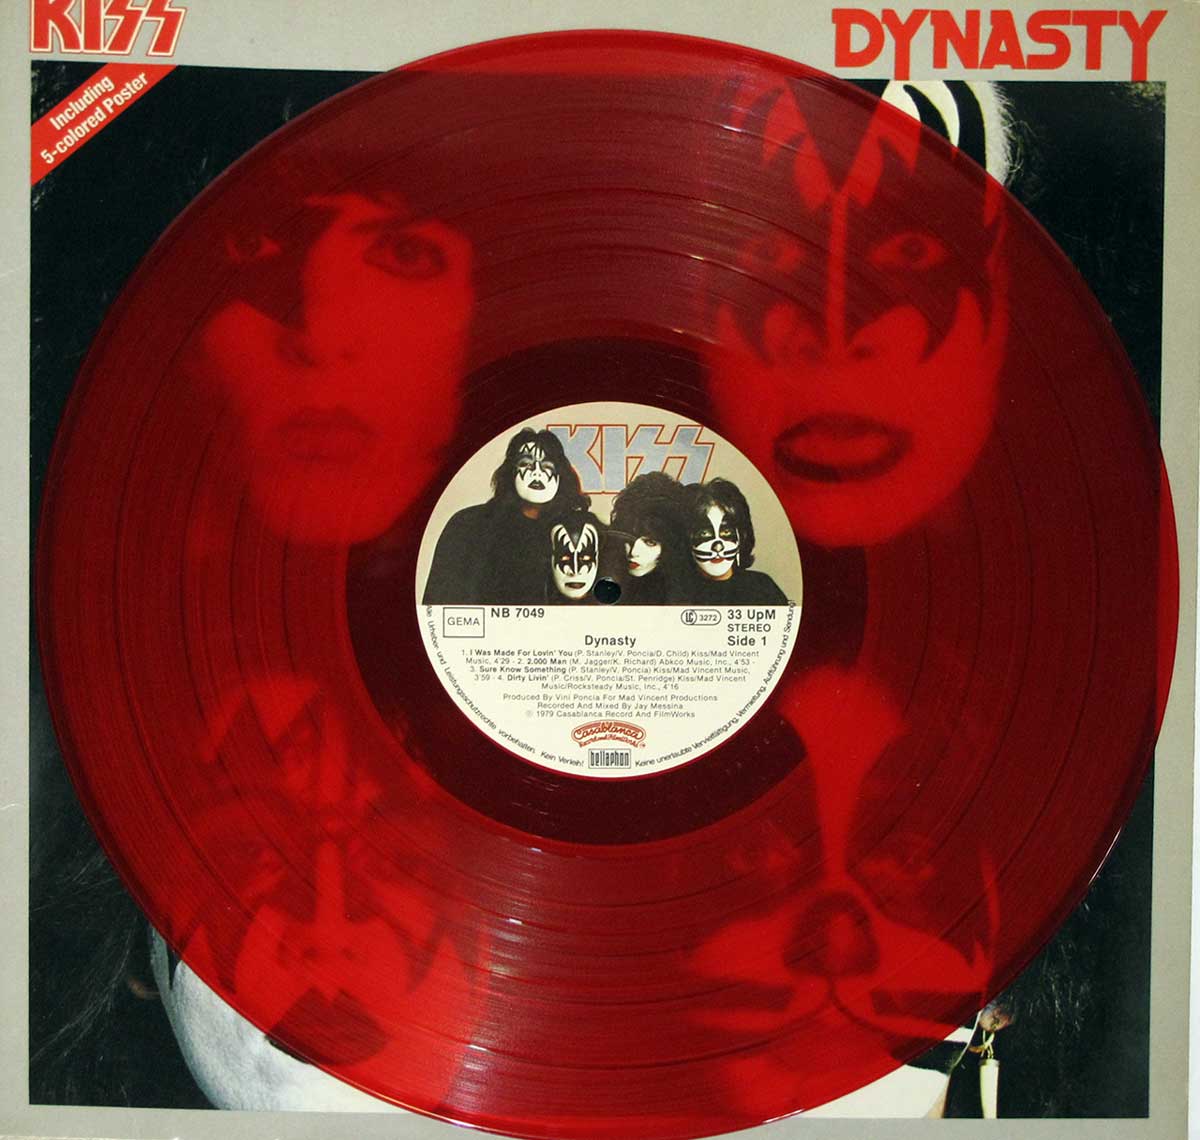 large album front cover photo of: KISS - DYNASTY - Red Coloured Vinyl 